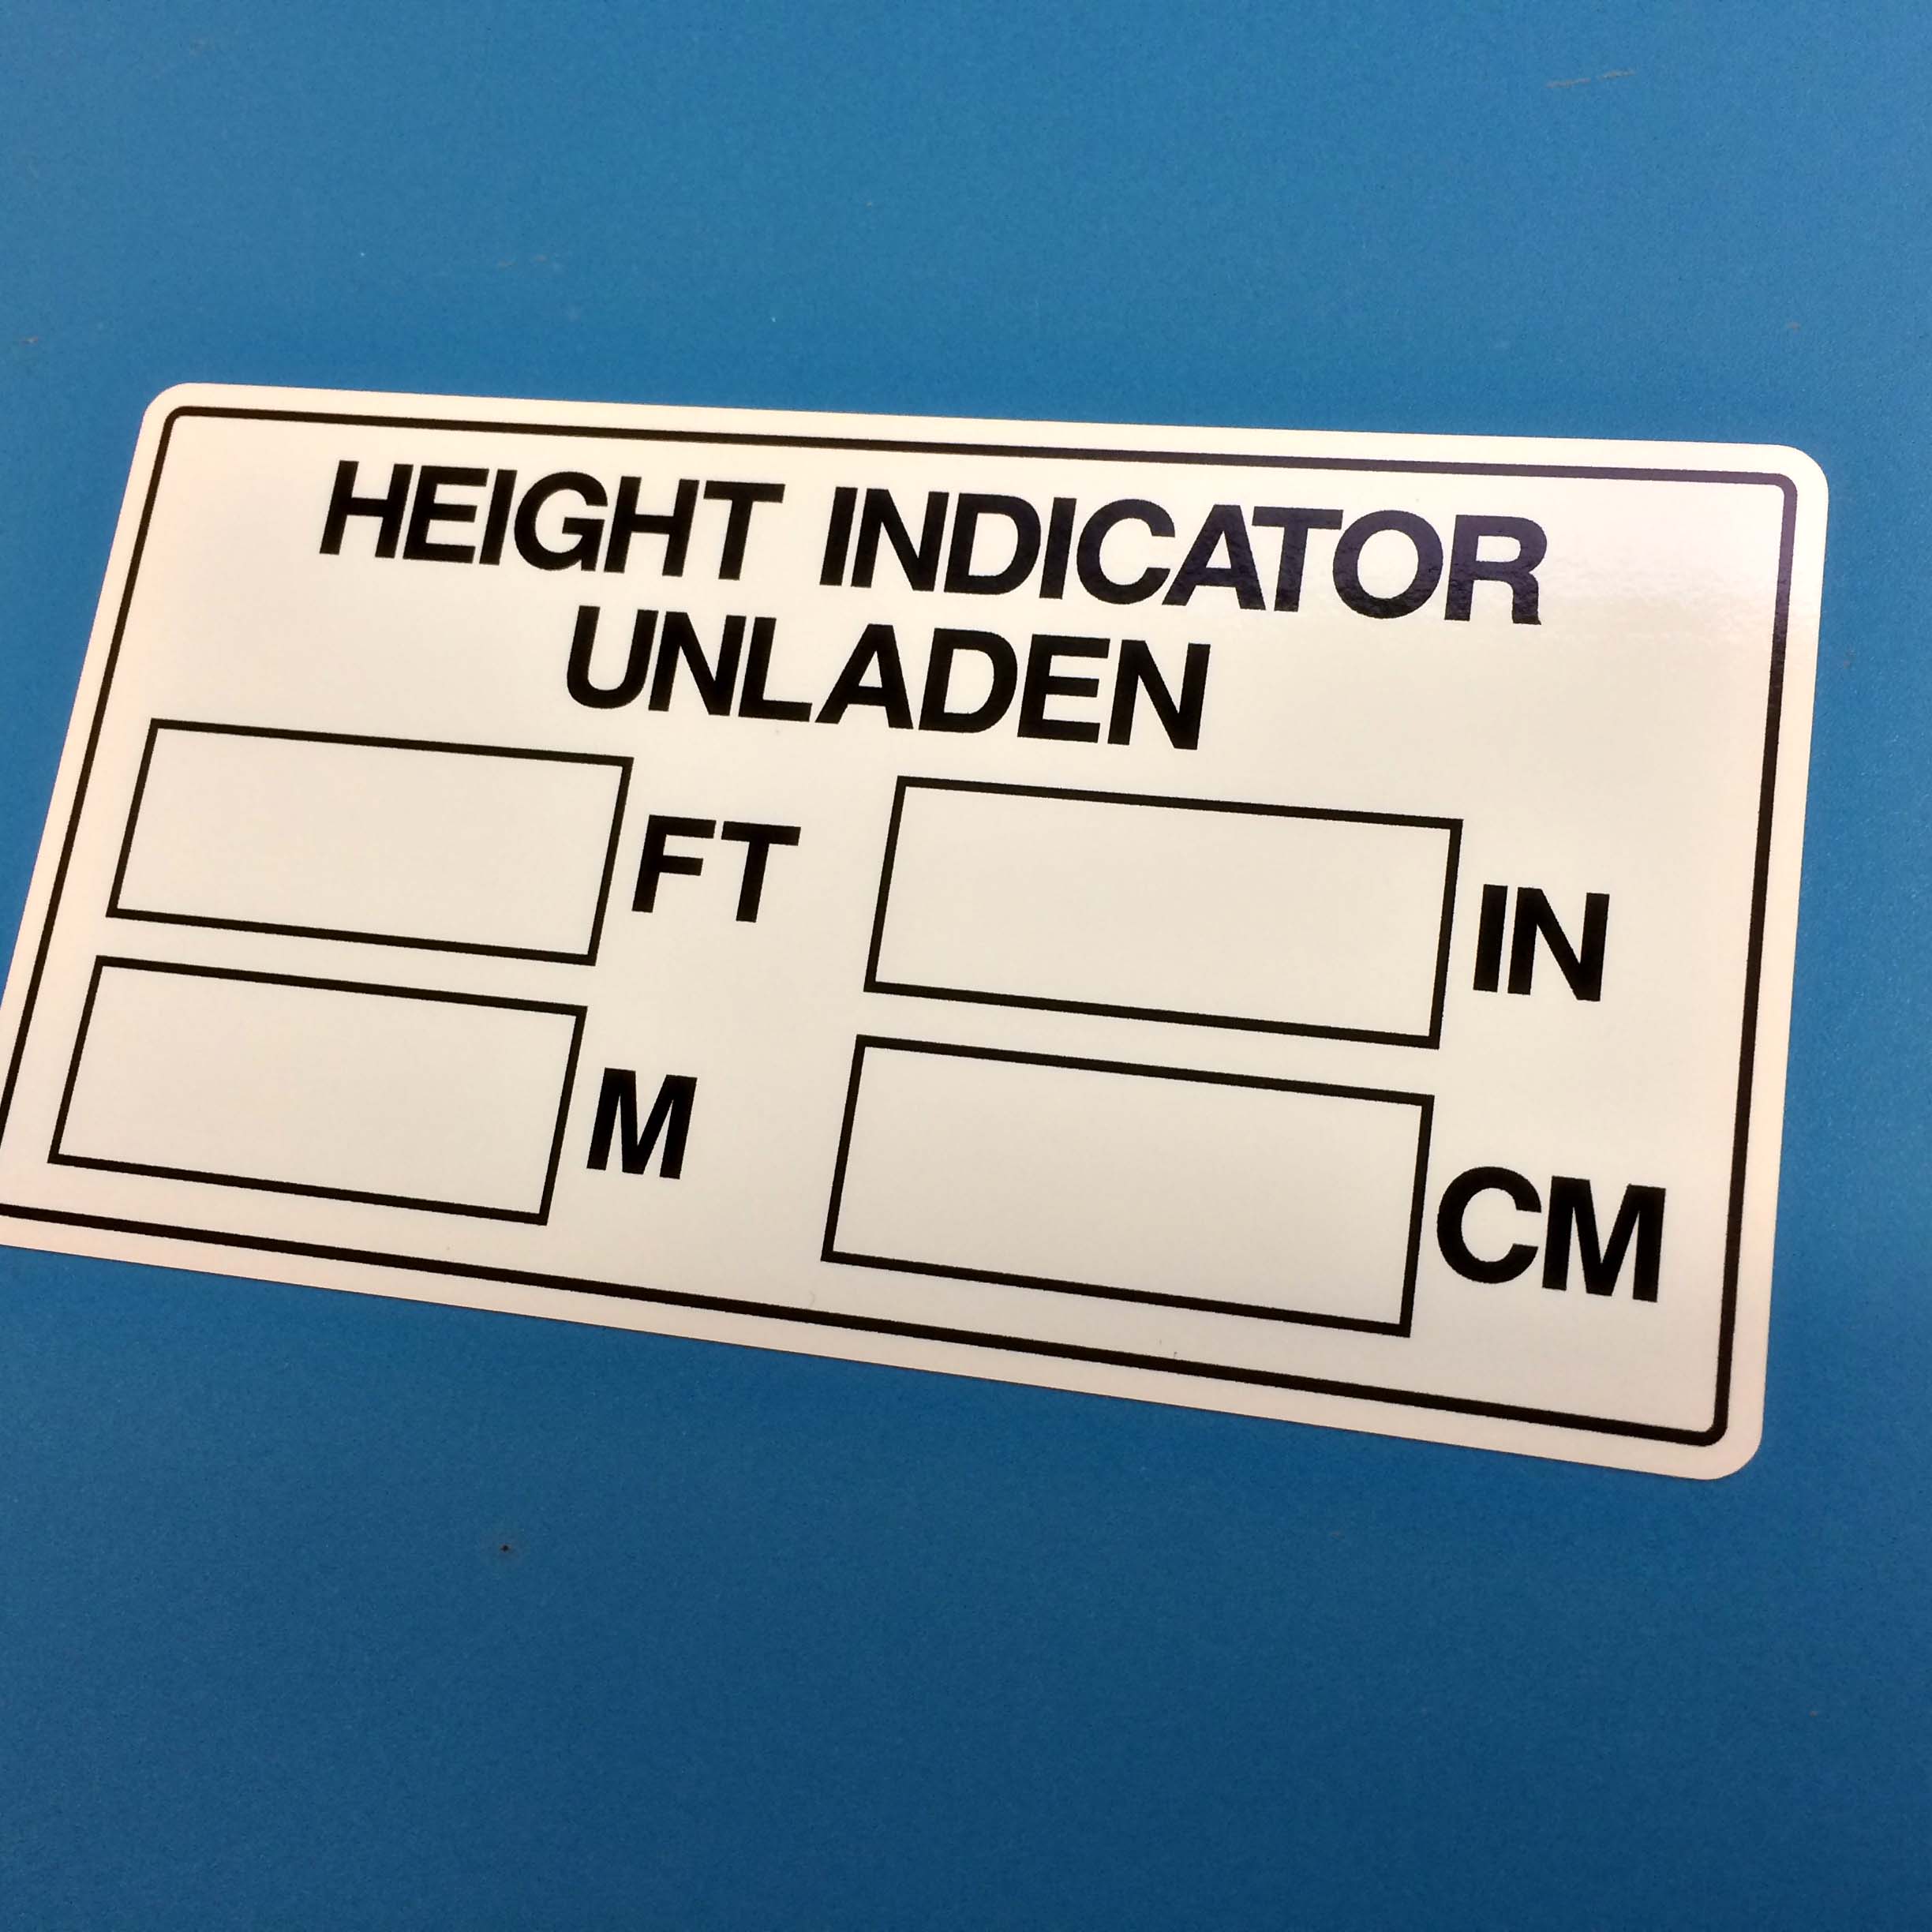 Height Indicator Unladen in black uppercase lettering on a white sticker. Below are four rectangular boxes labelled Ft, In, M and Cm.